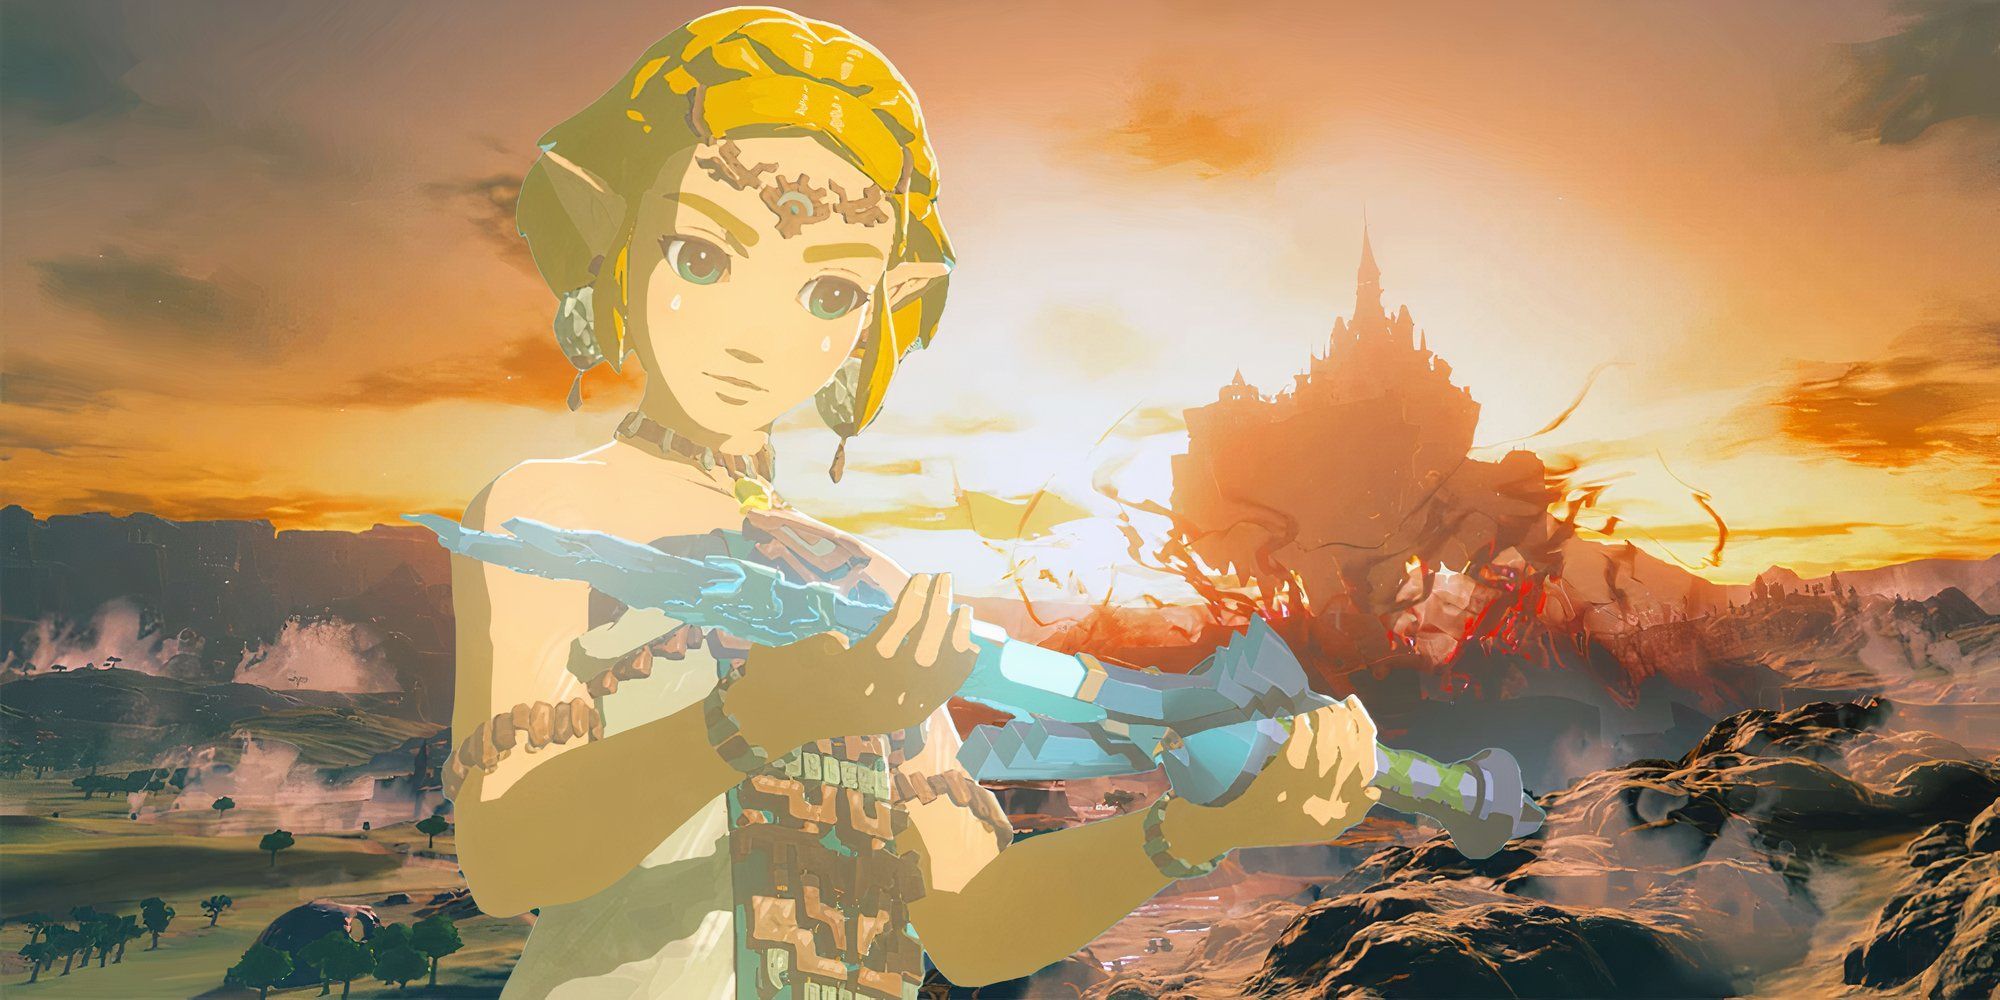 Zelda holding a sword with Hyrule Castle in the distance.